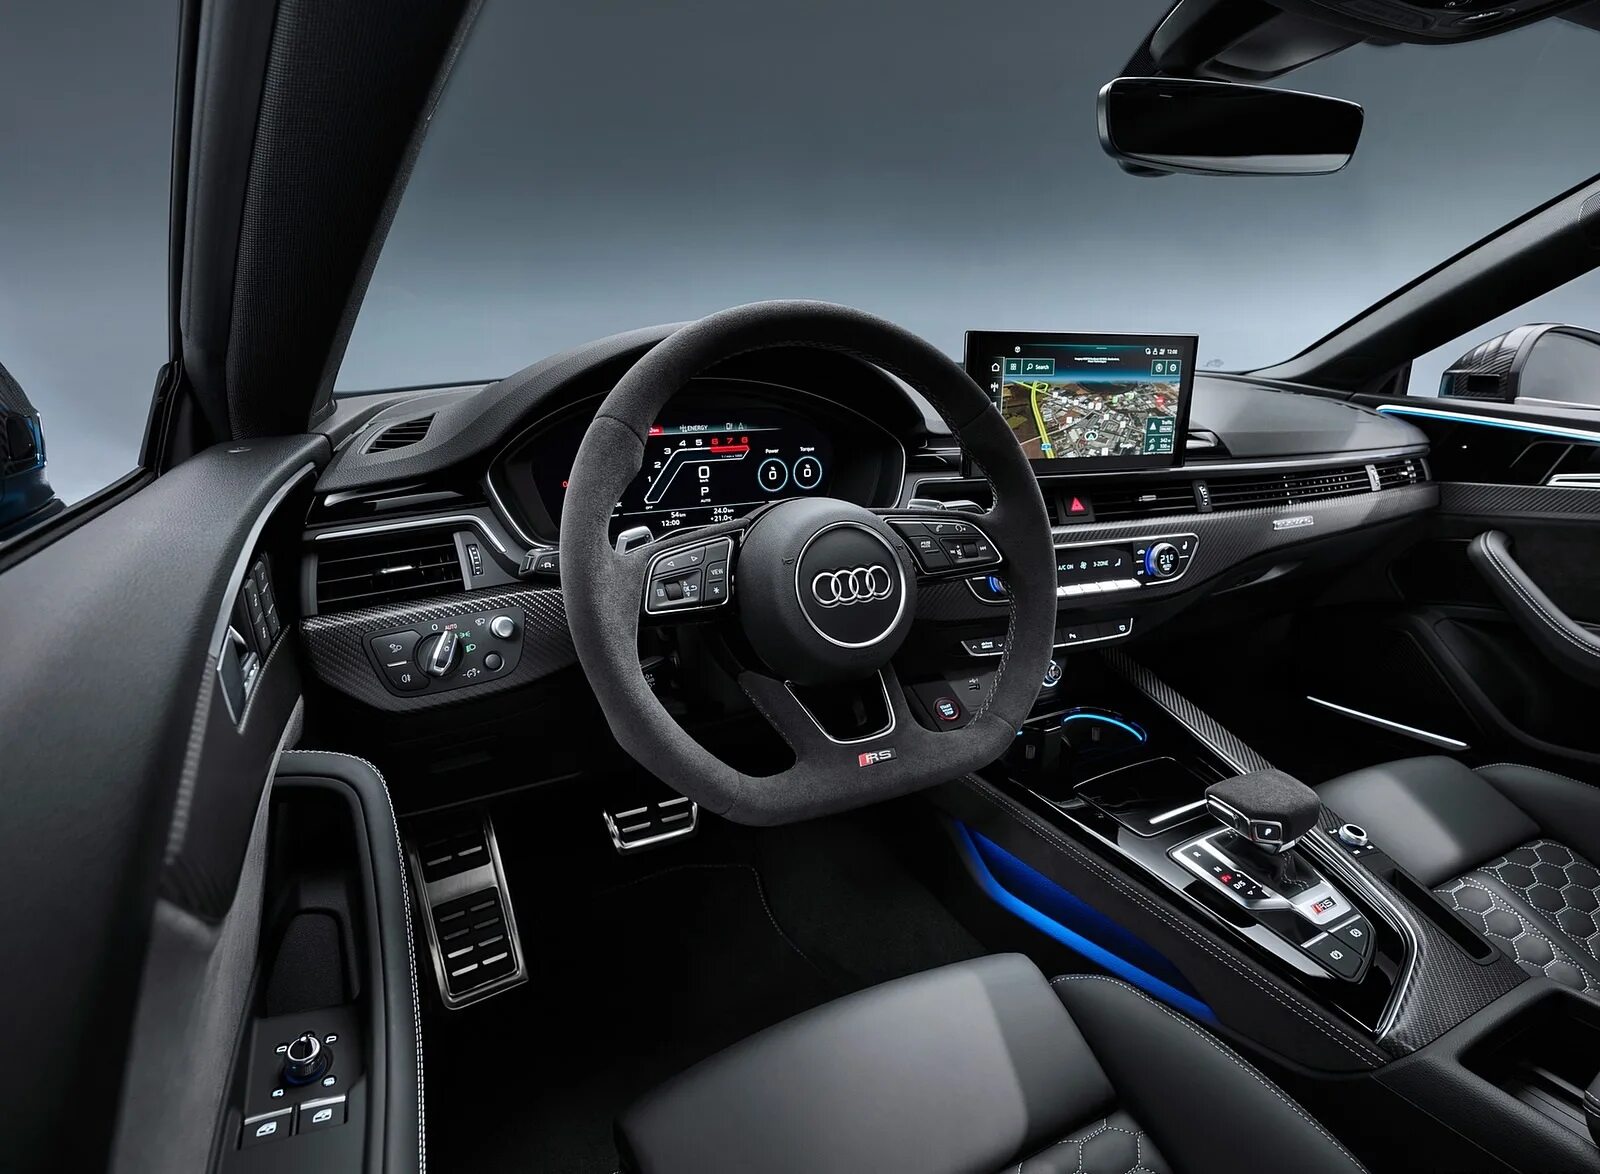 2020 1 5 2020 5 9. Audi rs5 Interior. Audi rs5 2020. Ауди RS 5 новая. Ауди rs5 Coupe 2020.